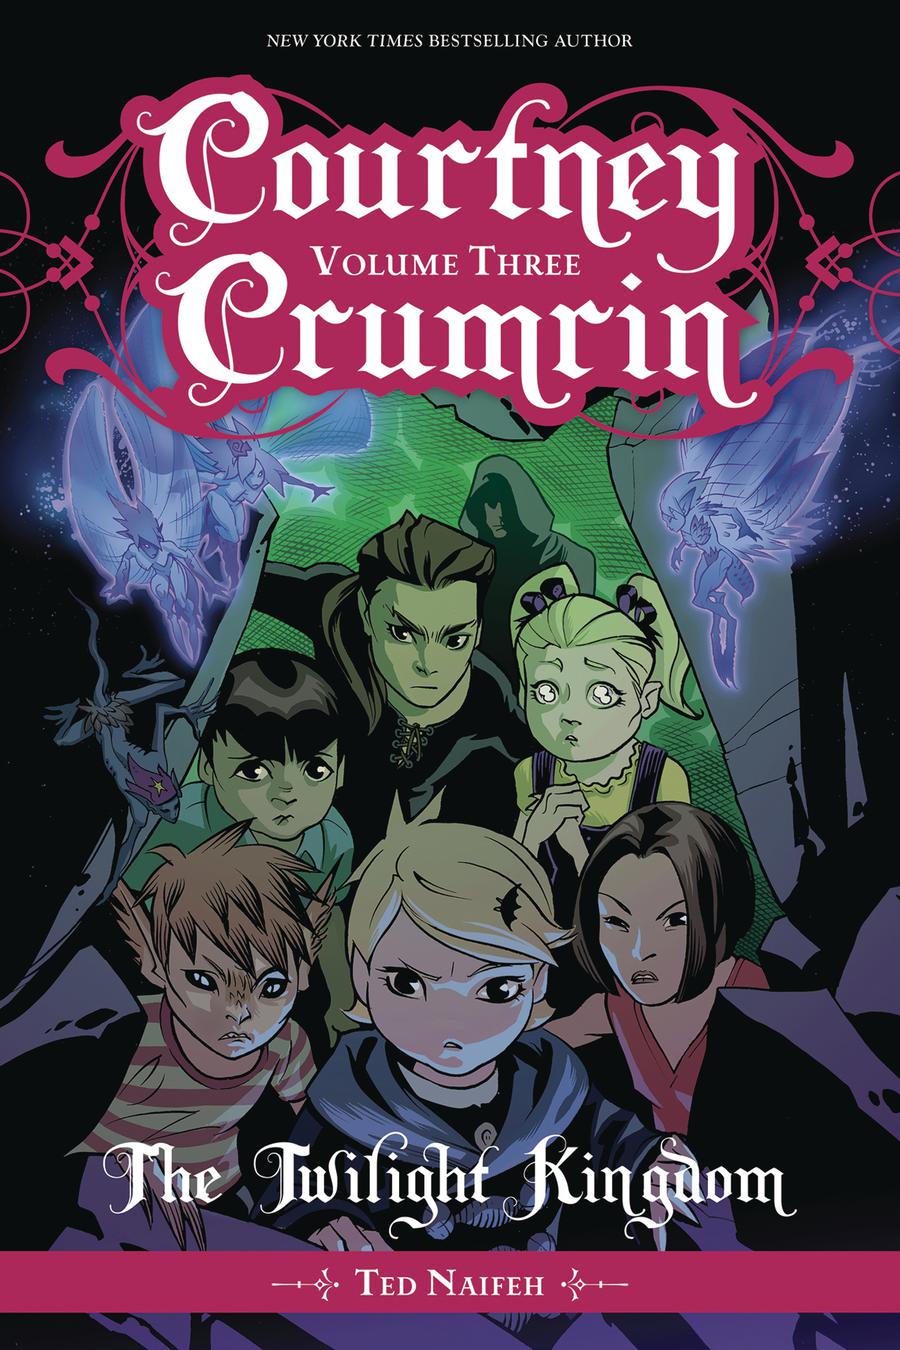 Courtney Crumrin Vol 3 The Twilight Kingdom TP Special Edition